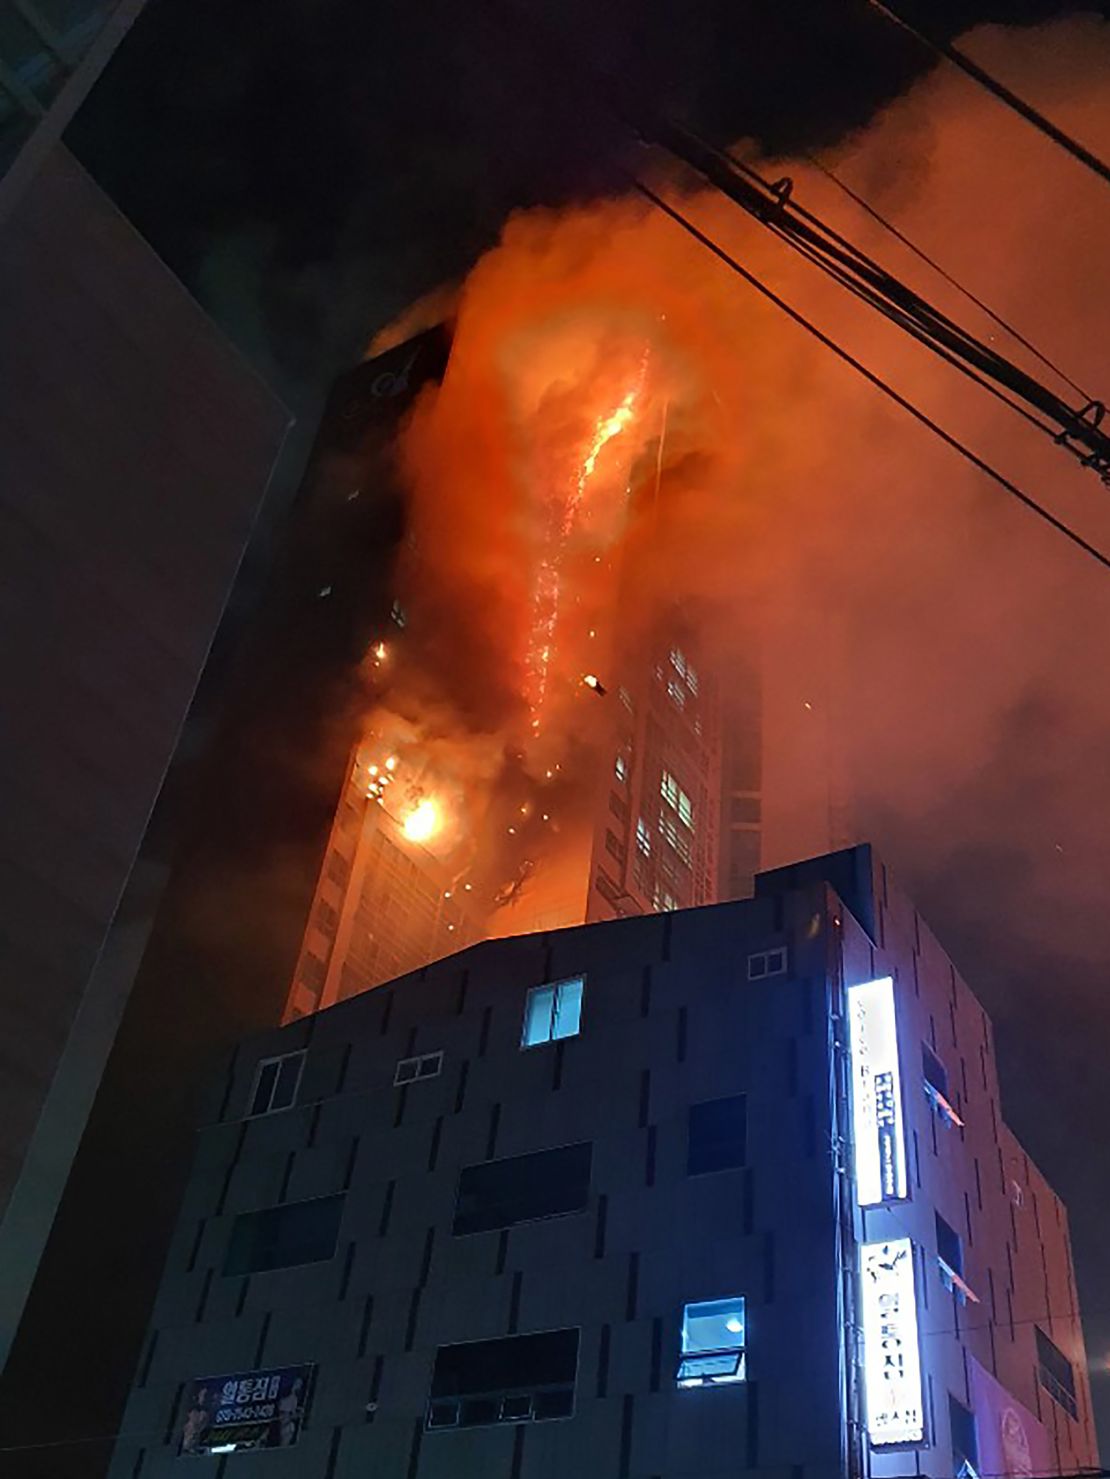 88 people were hospitalized for smoke inhalation and other minor injuries, according to Ulsan authorities. 